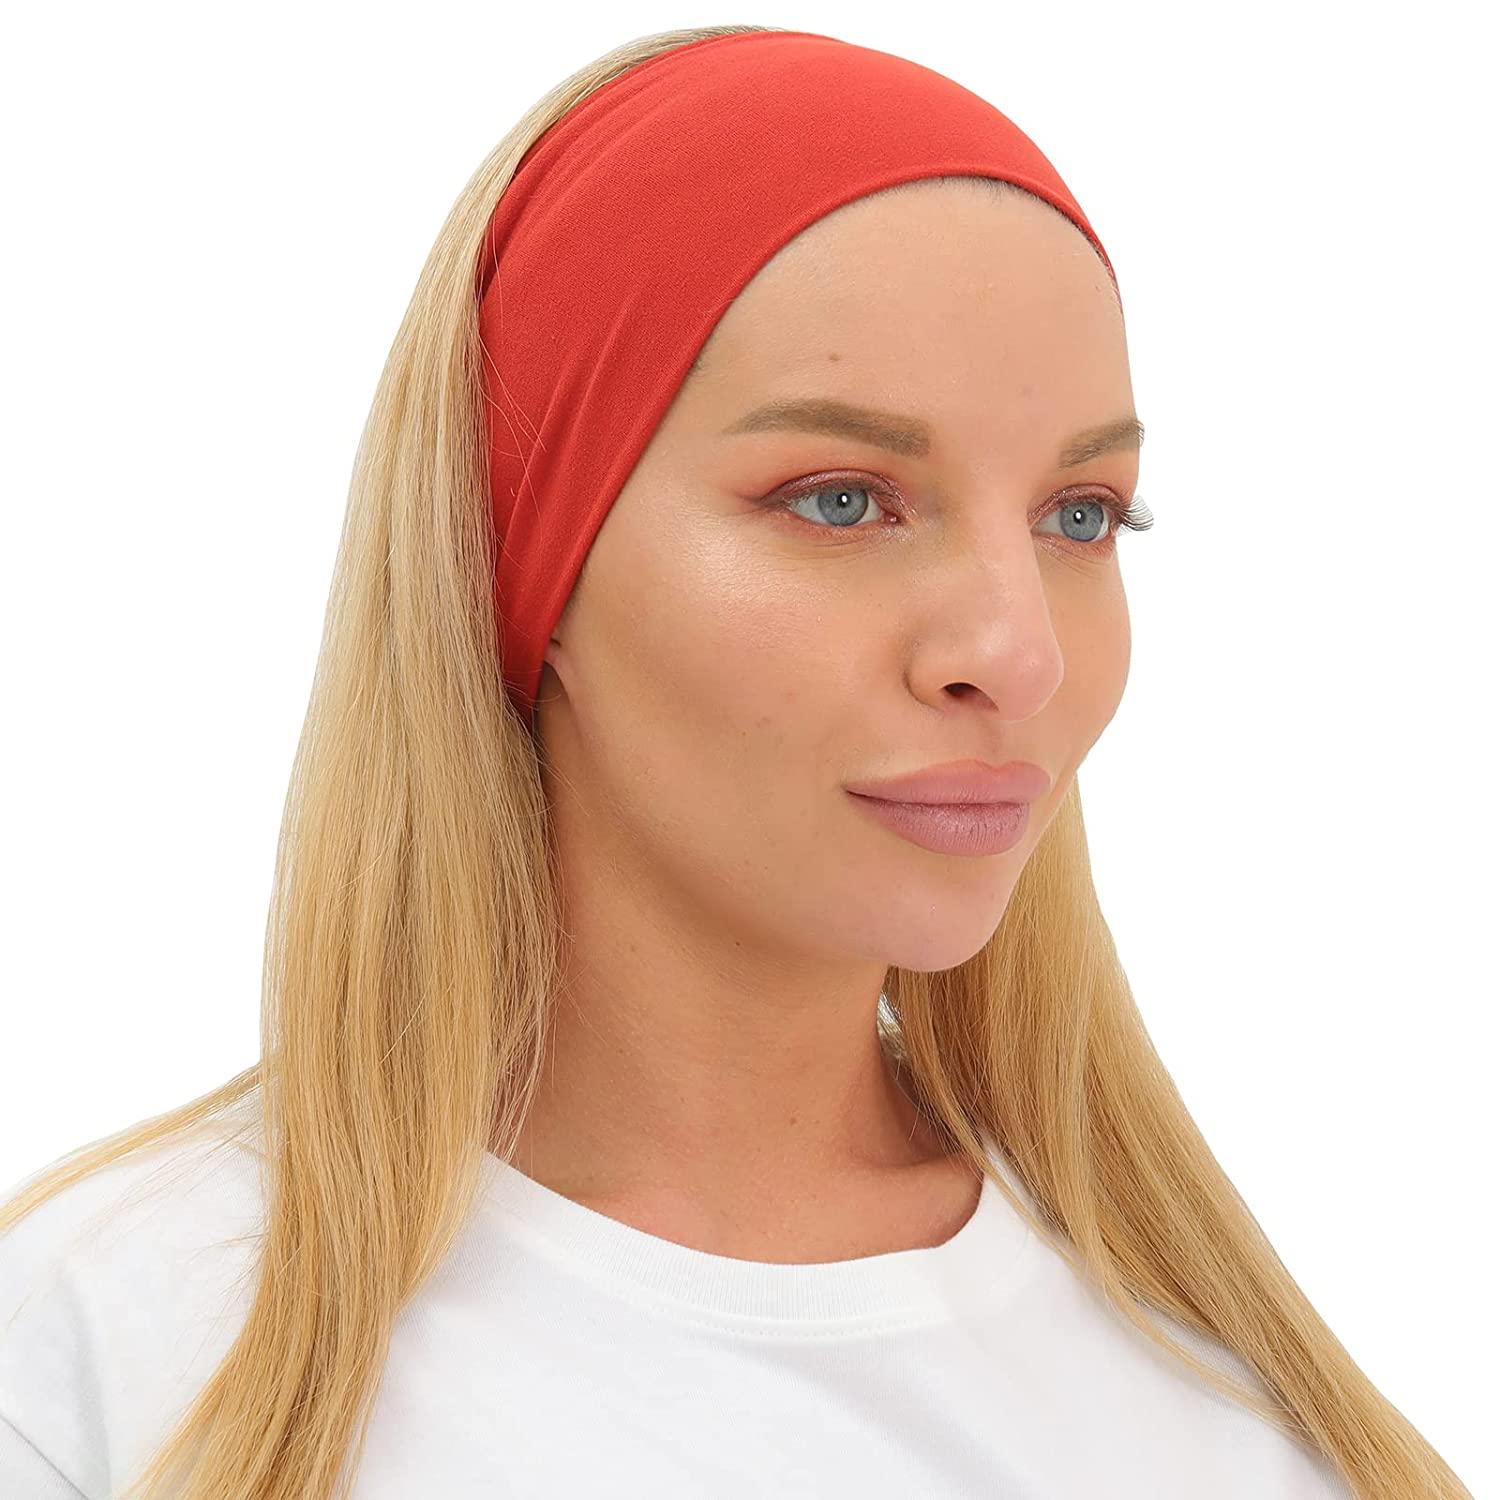 Workout Headbands for Women Non Slip 3 Pack- Sweat Wicking Hair Bands for  Yoga Fitness Sports Running,Elastic,Fits All Head Sizes and Under Helmets